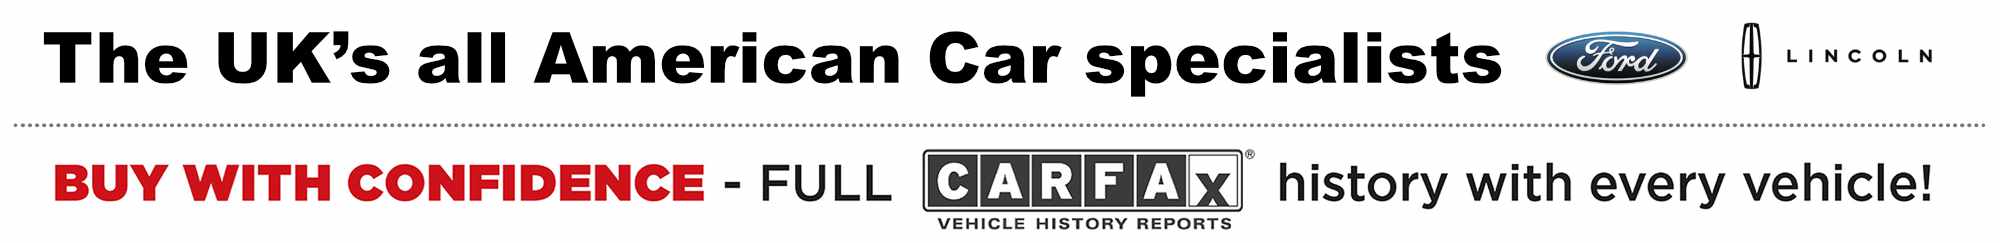 The UK’s all American Car specialists 